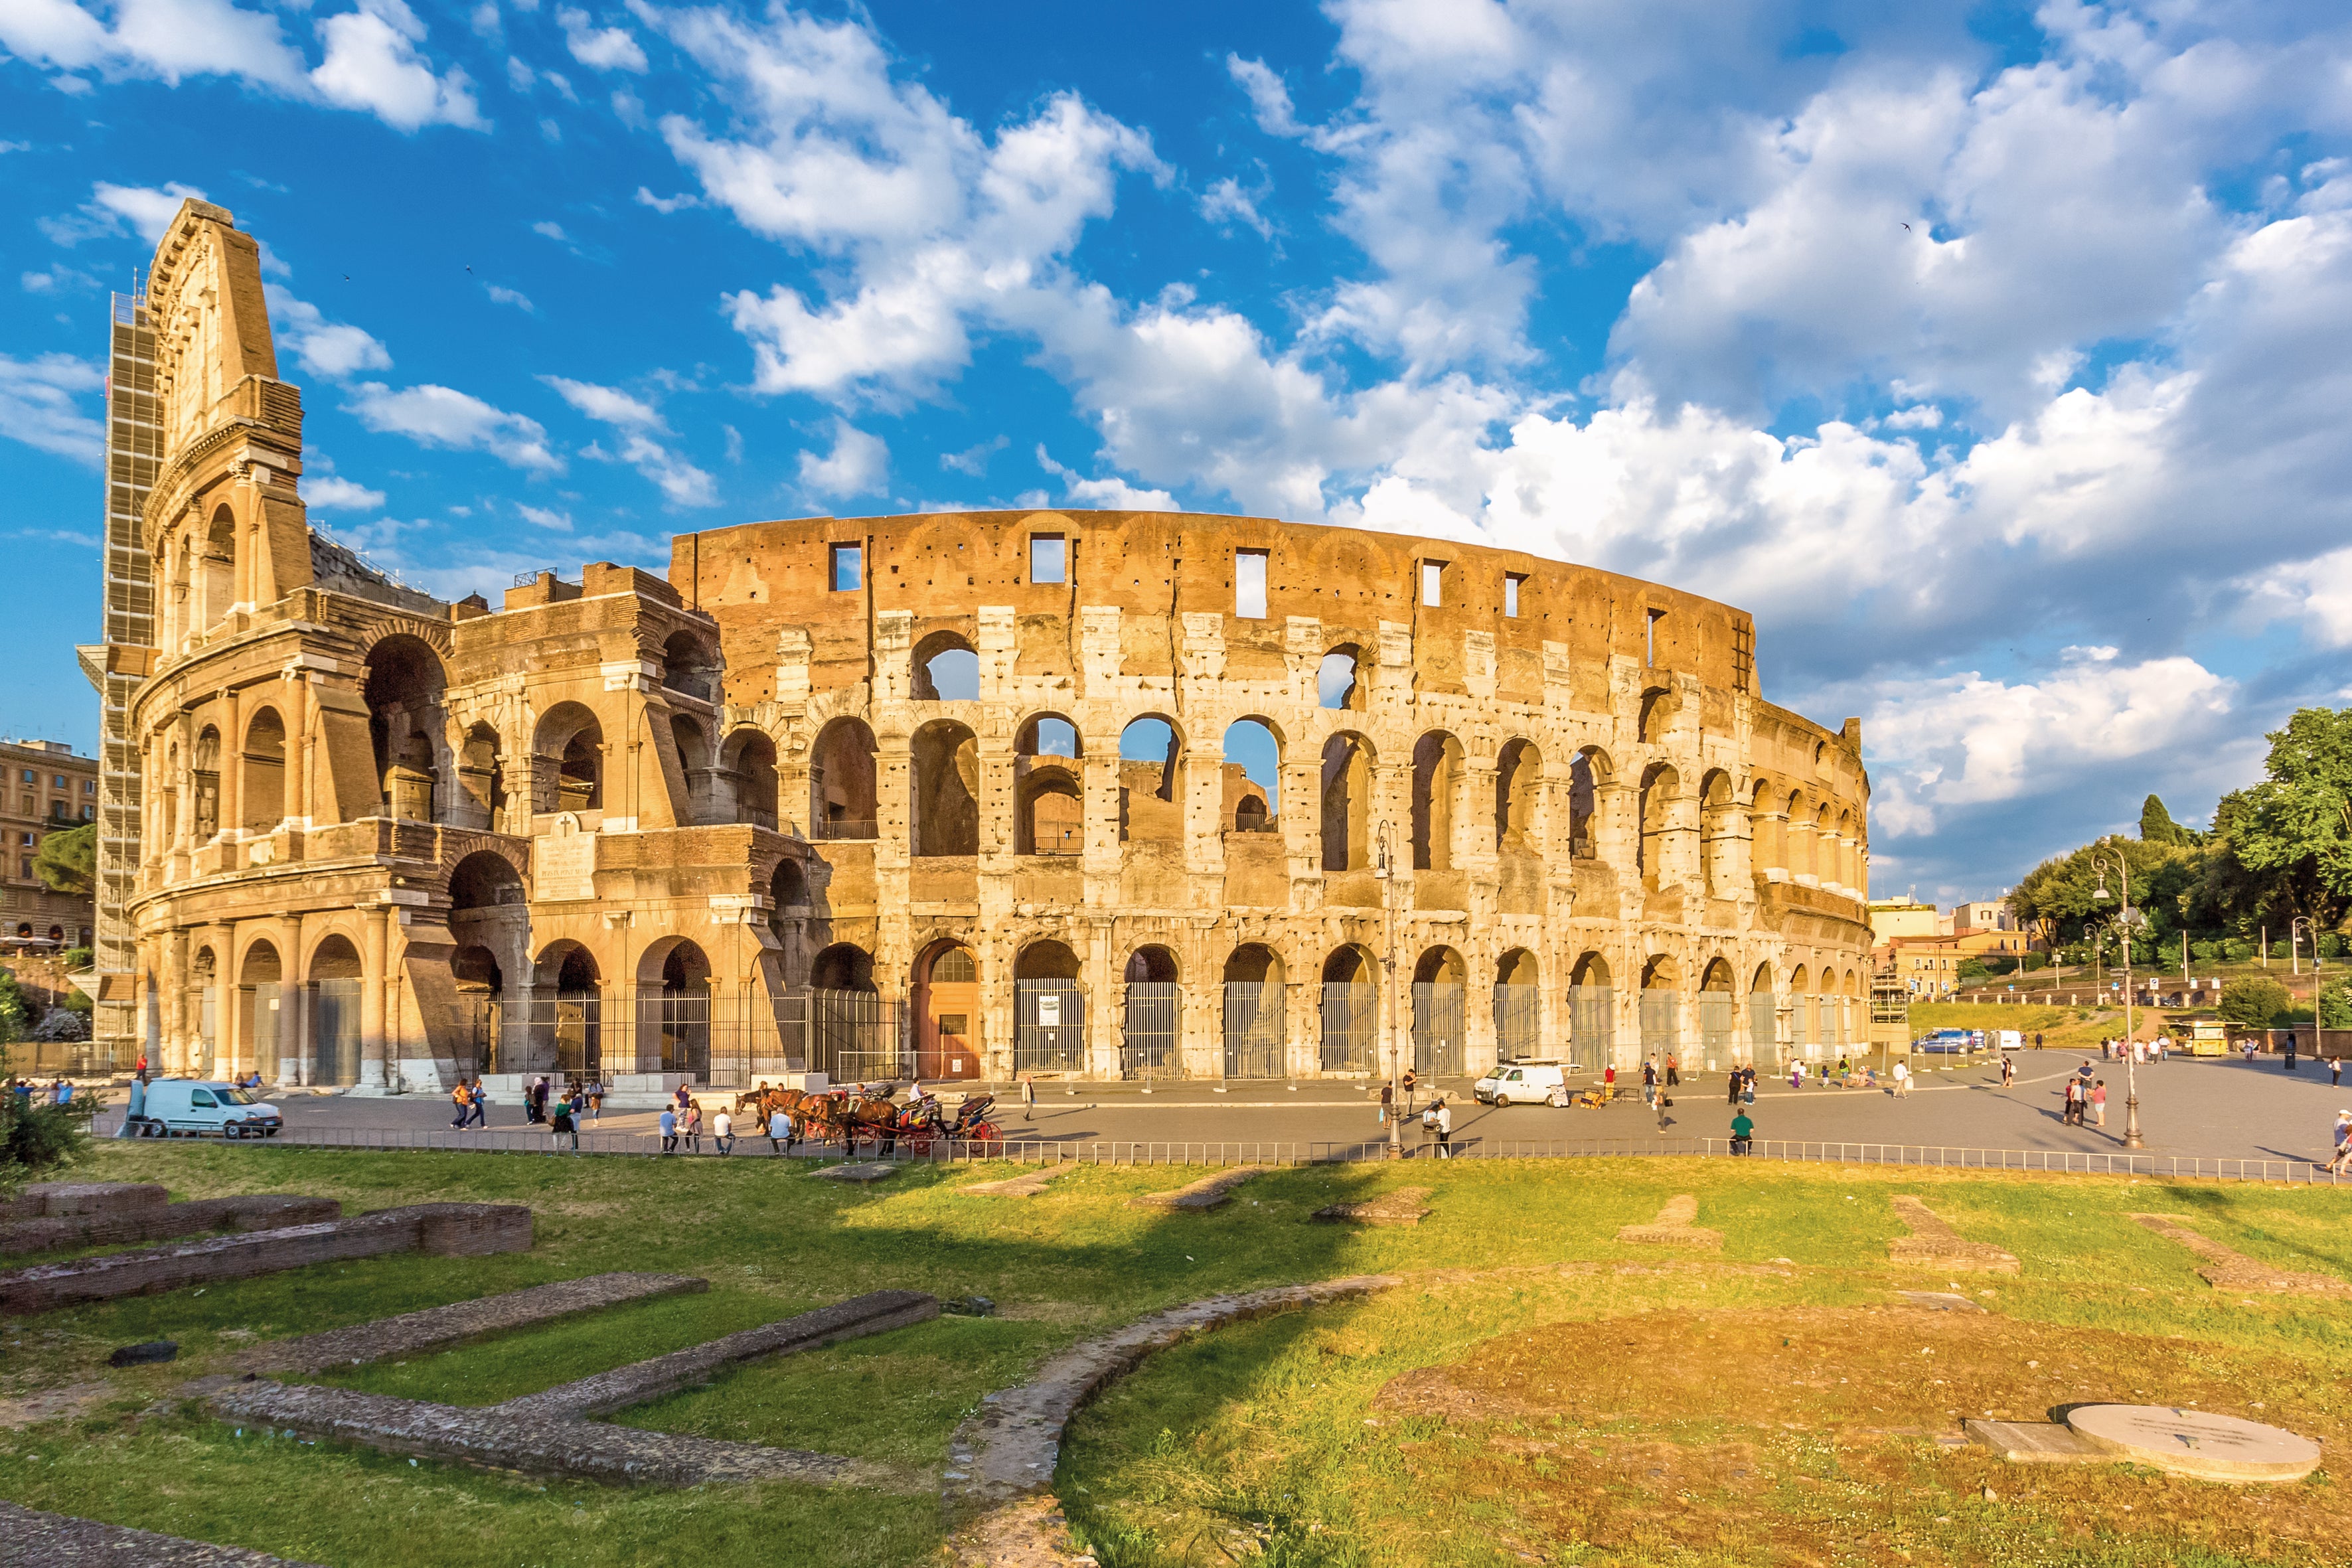 Immerse yourself in new cultures and stylish surrounds on a European citybreak